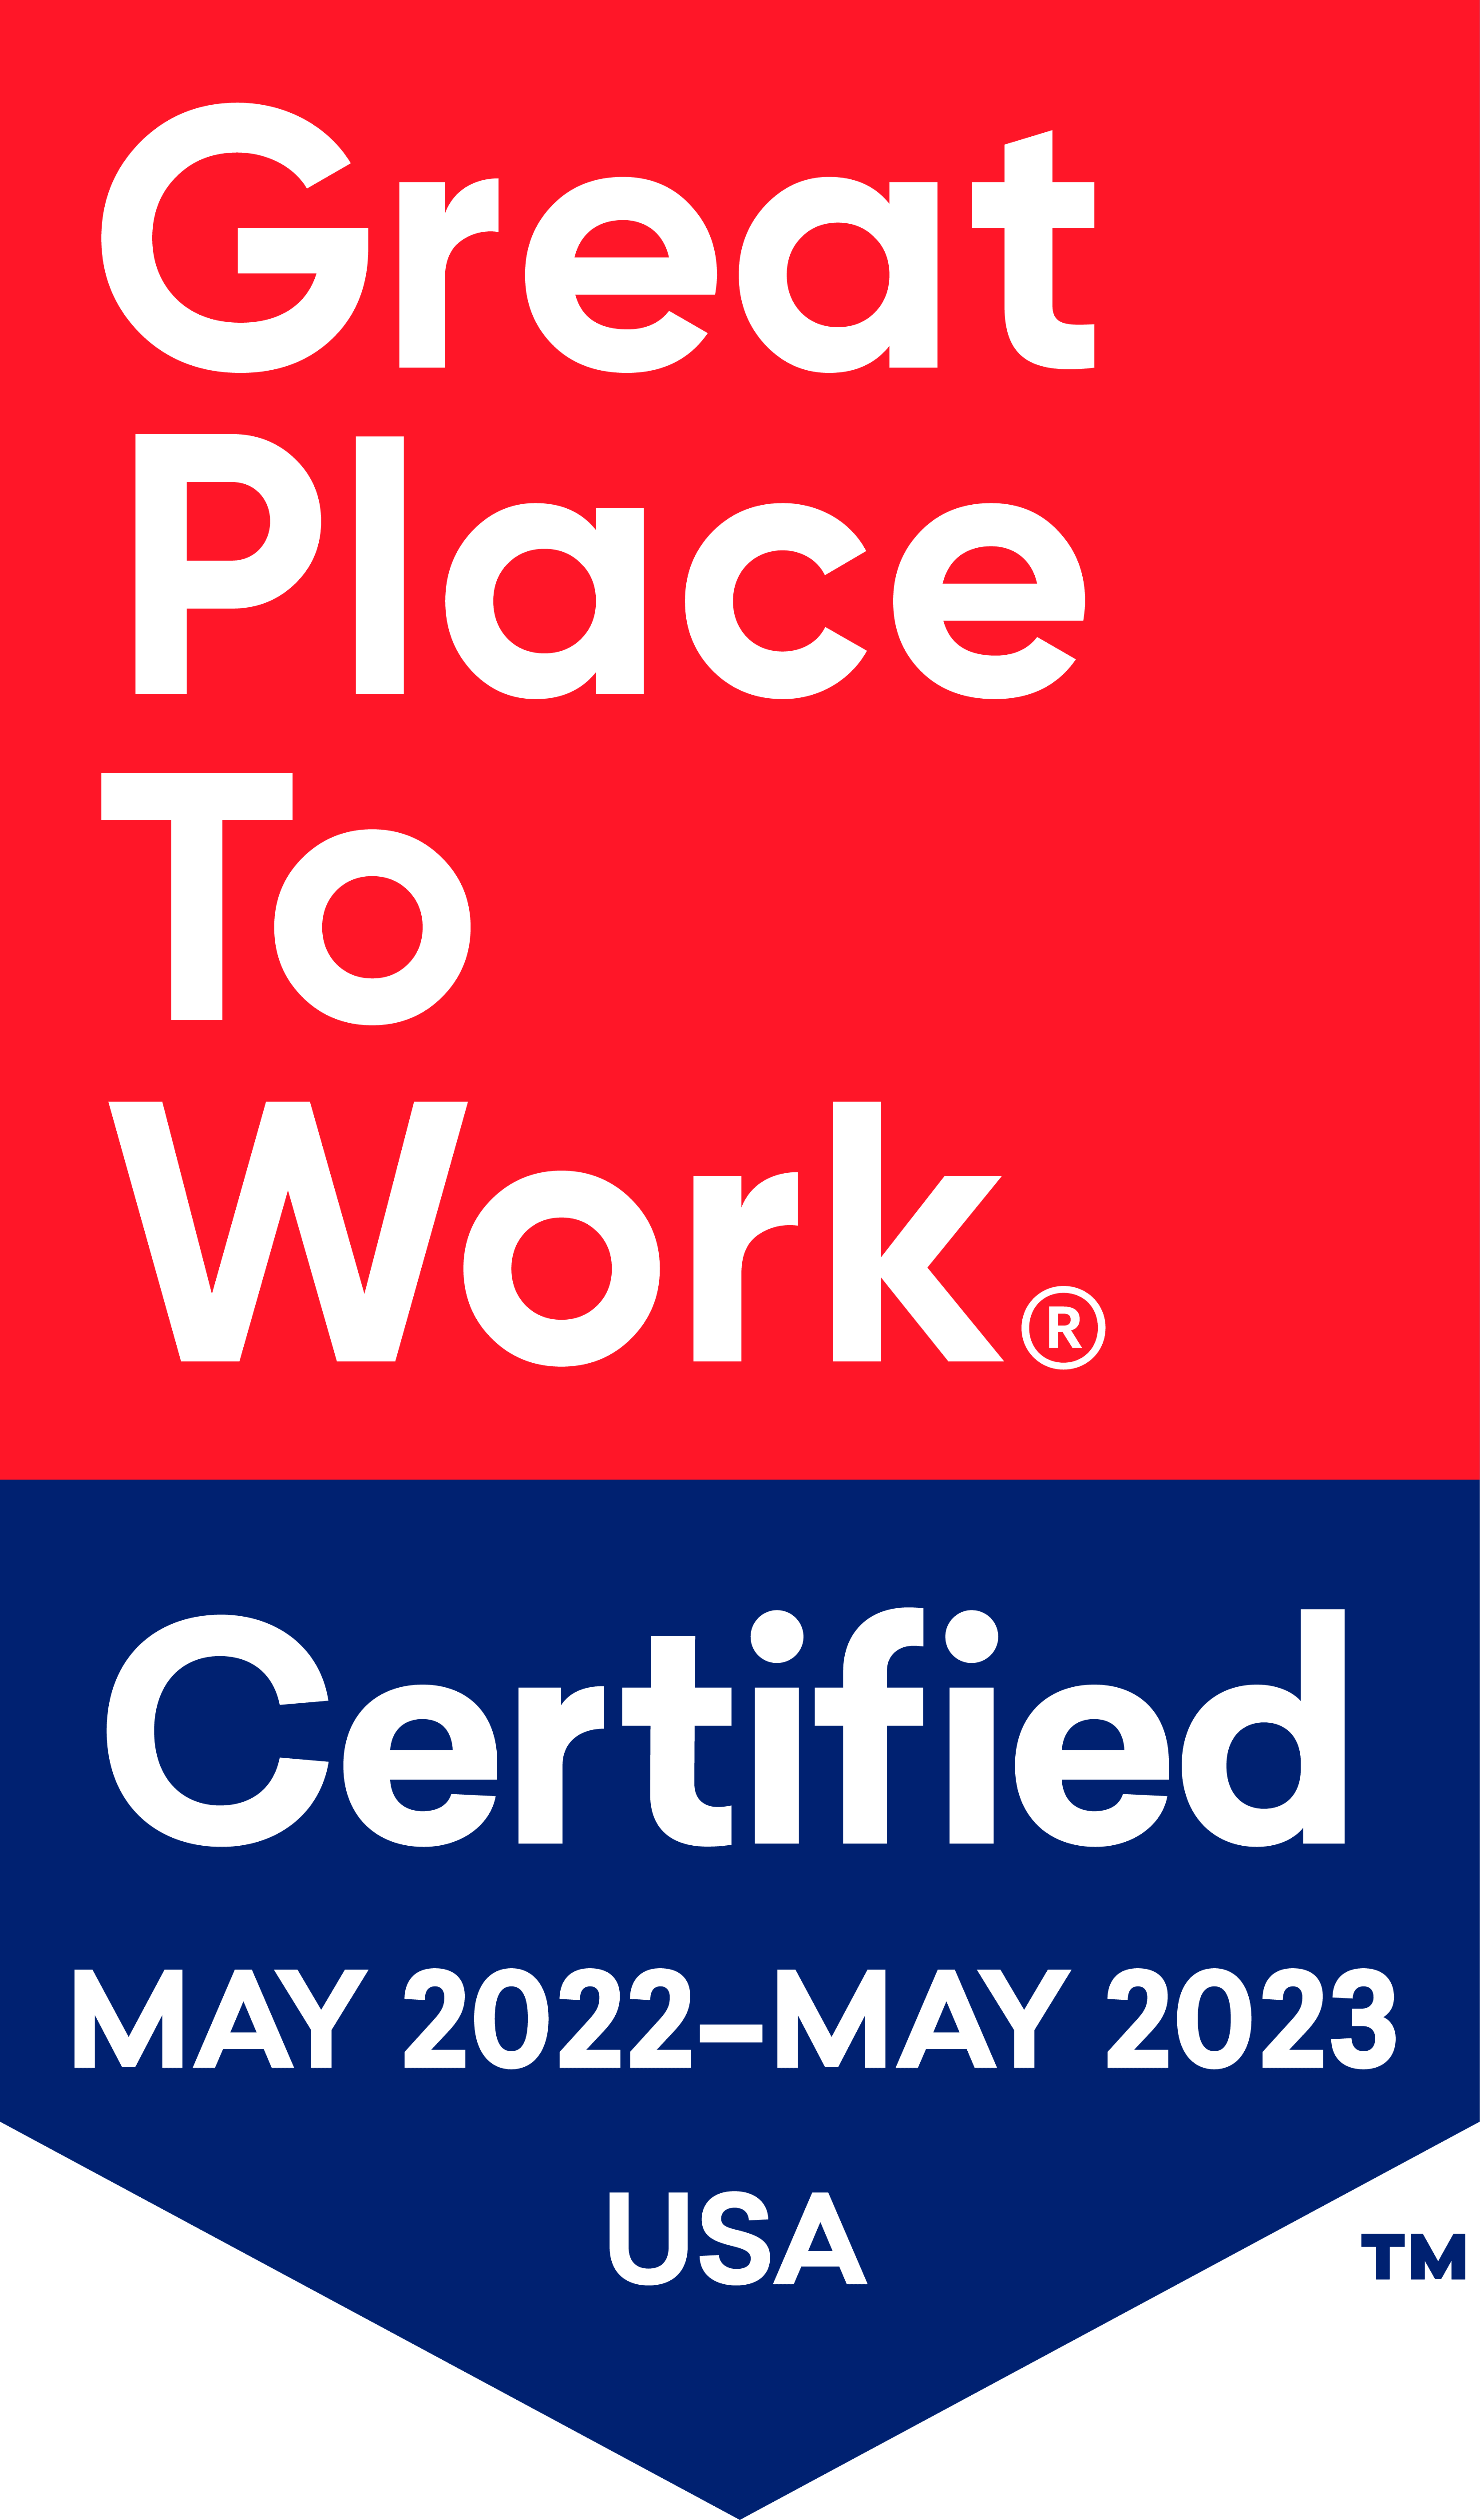 MBK Senior Living is Great Place To Work Certified